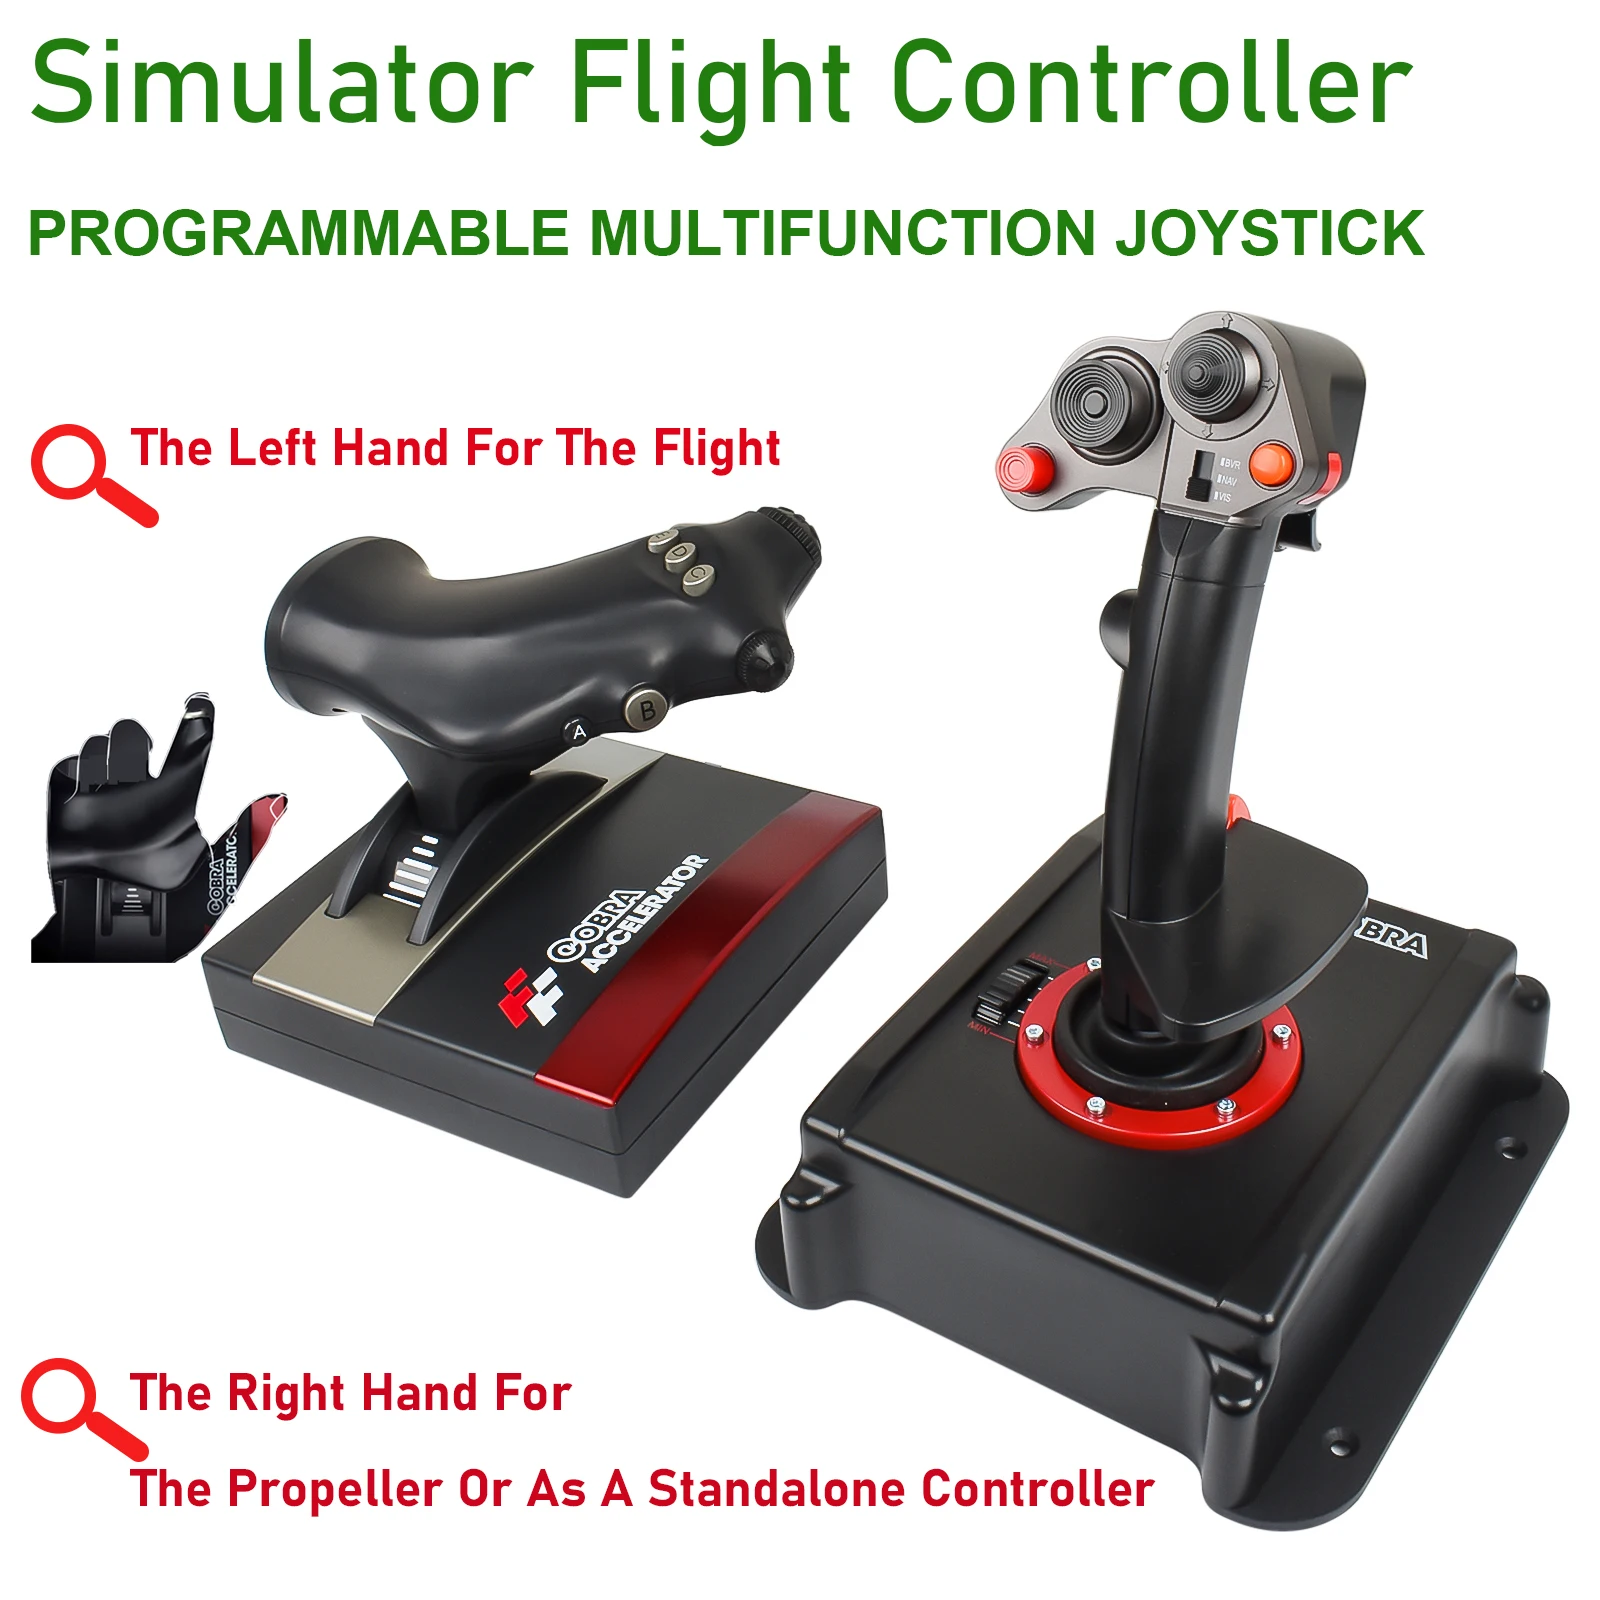 

Simulator Flight Controller For PC Windows XP/7/8/10 The Left Hand For the Flight and Right Hand For the Propeller Or As A Stand